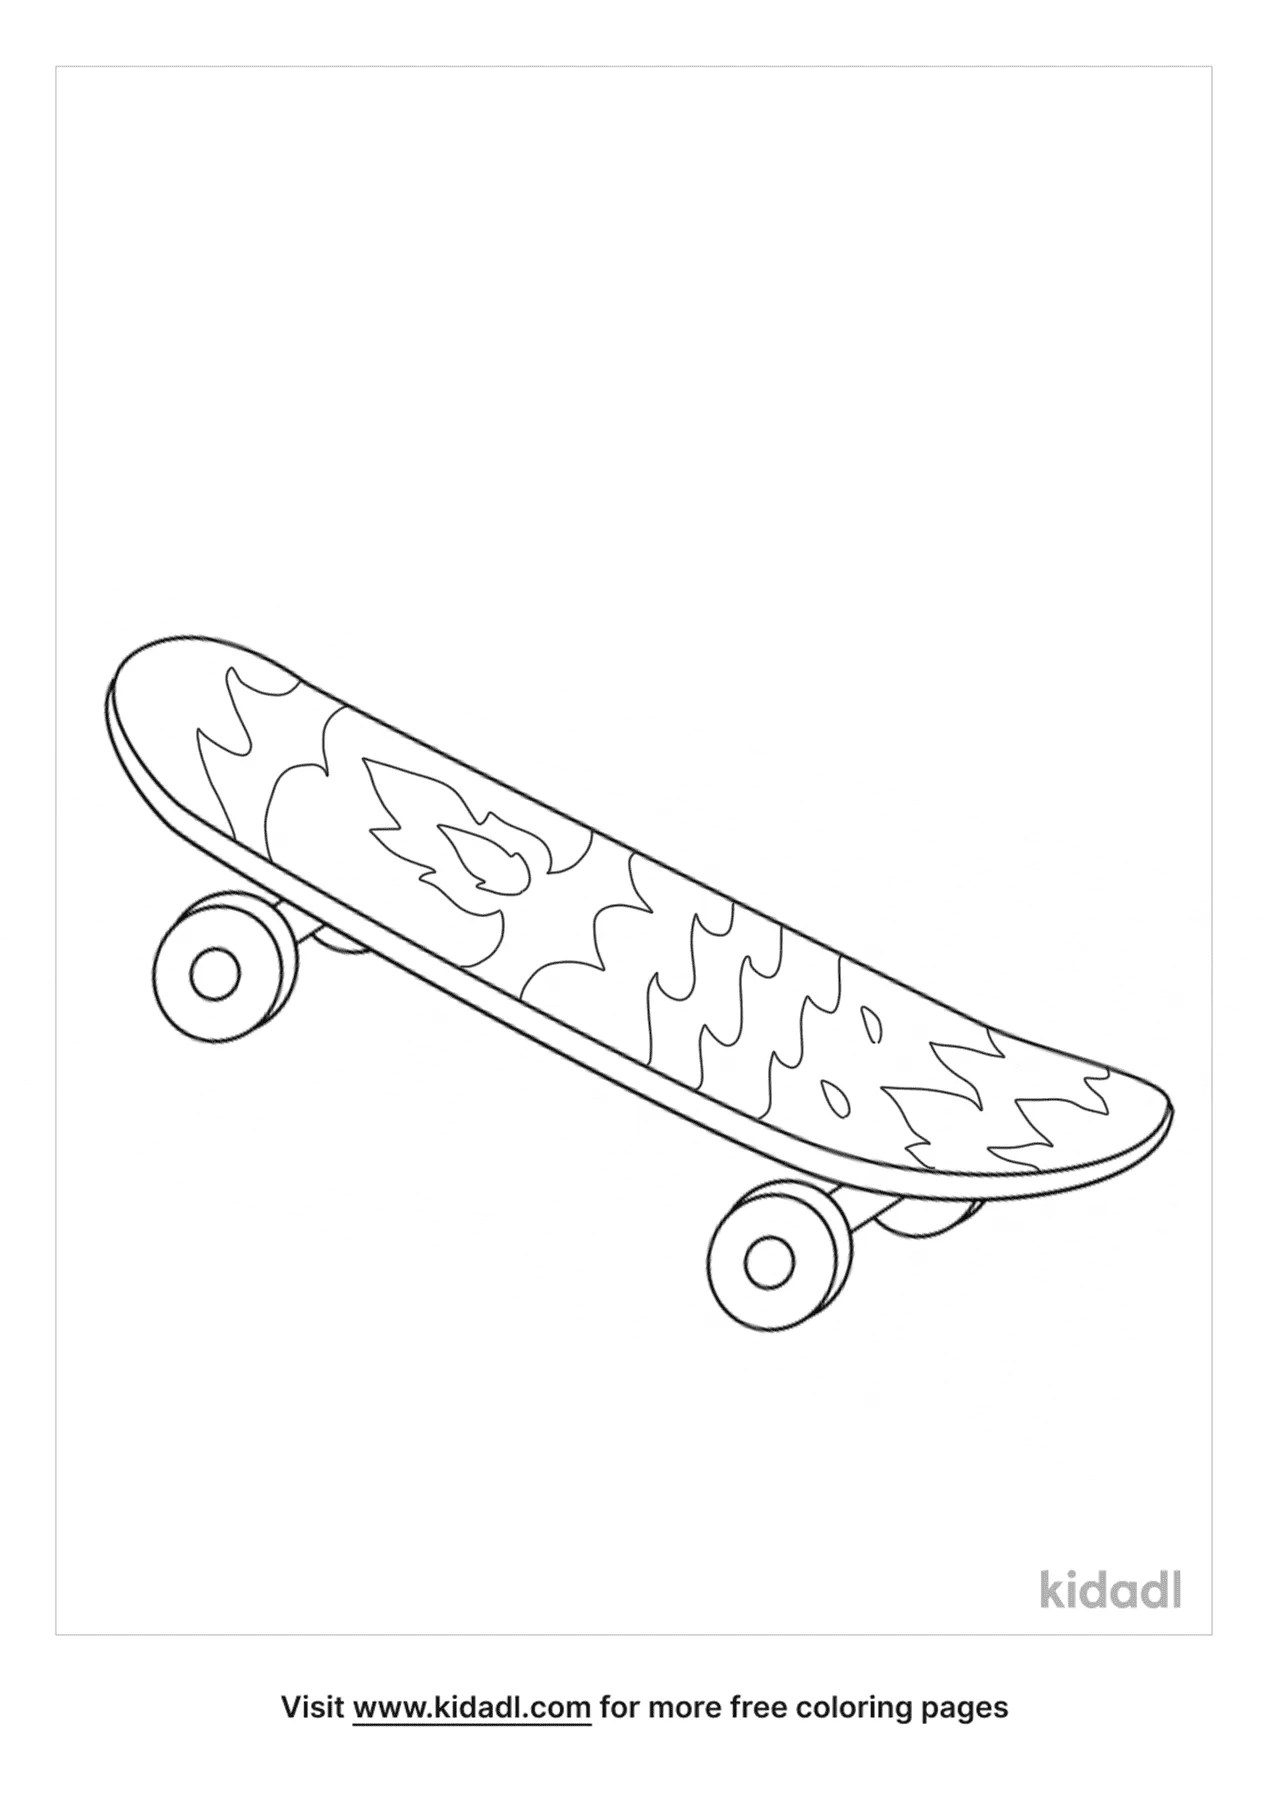 Fire Skateboard Coloring Page